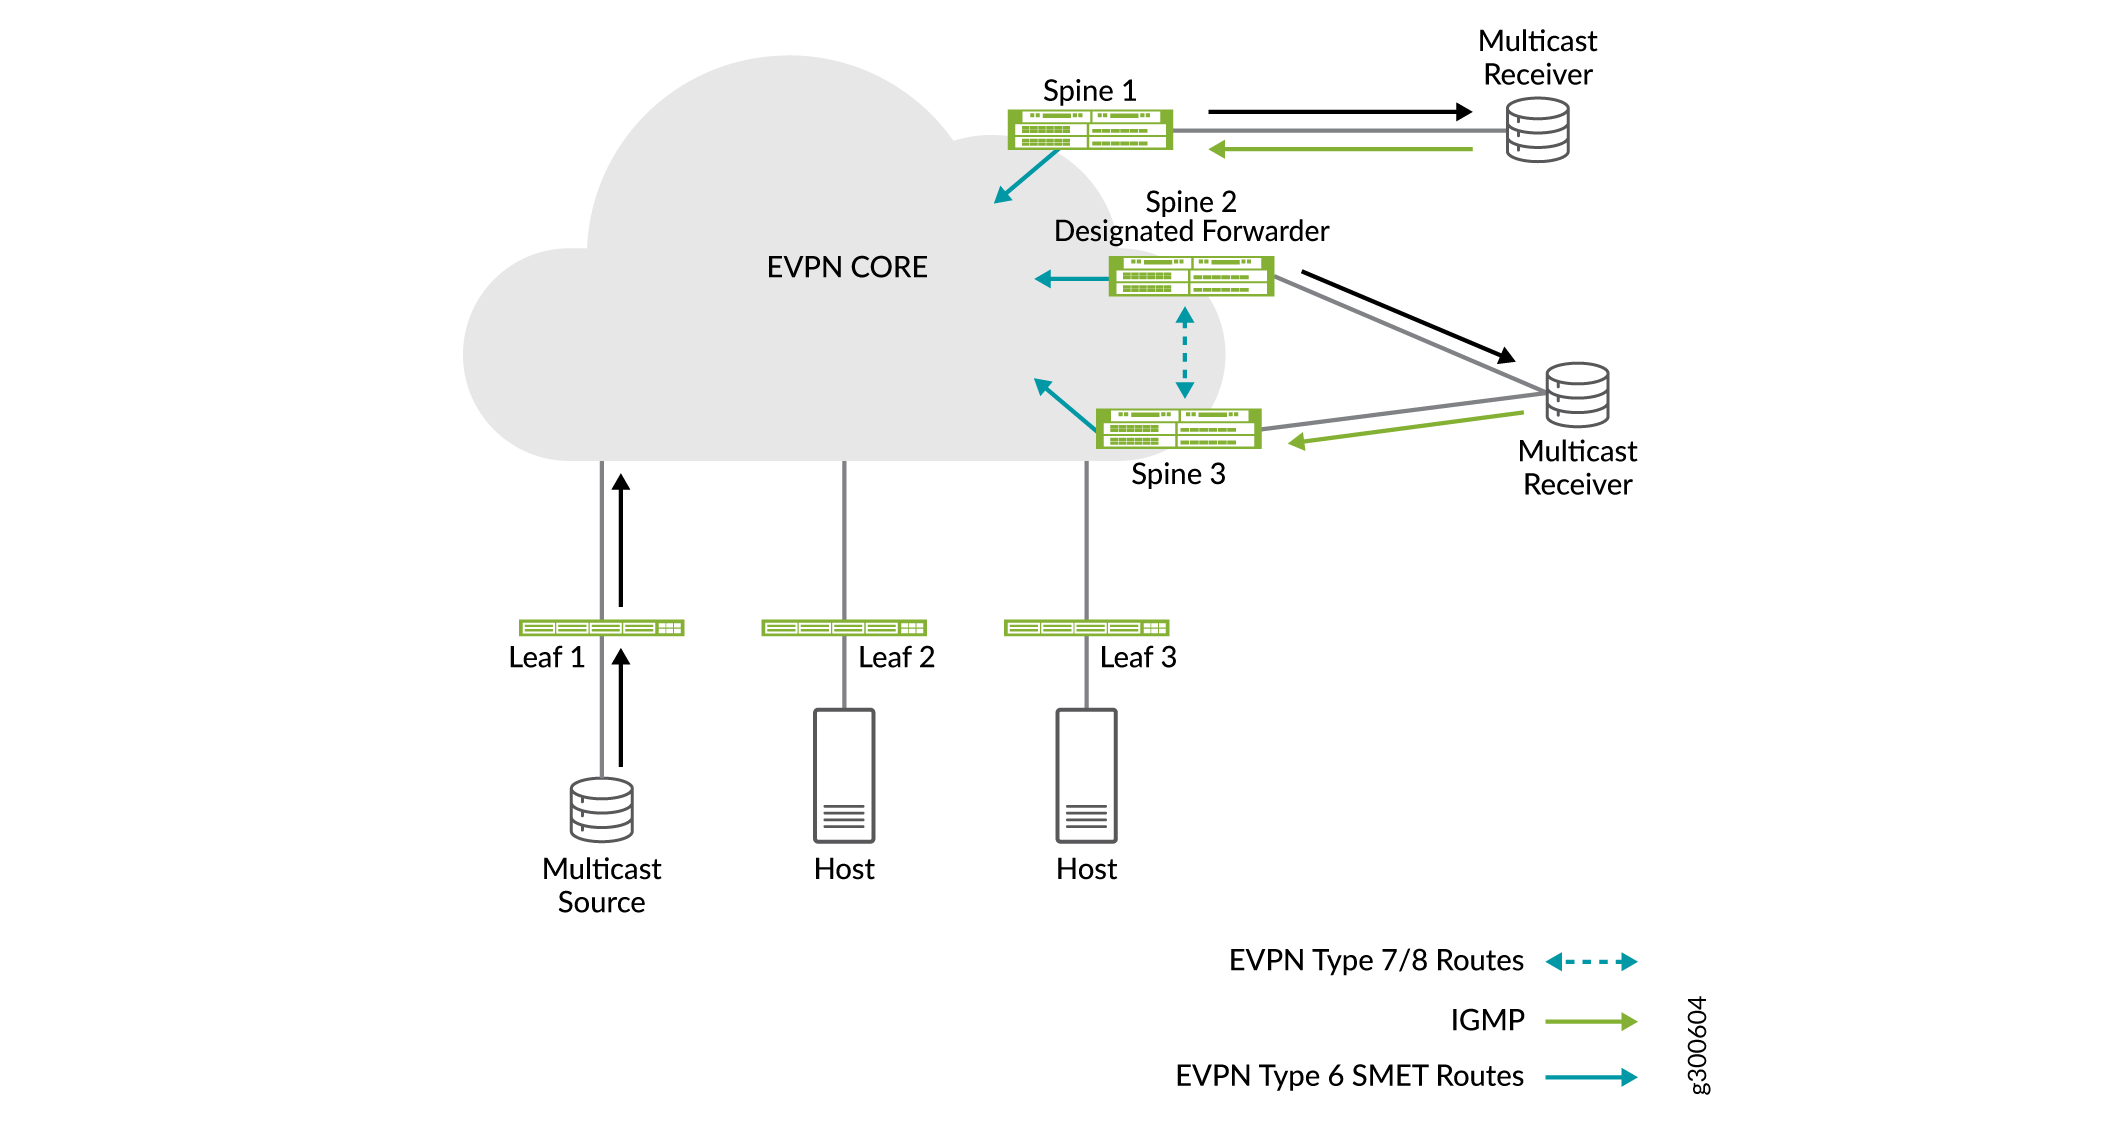 Intra-VLAN Multicast Traffic Flow with IGMP Snooping and Selective Multicast Forwarding